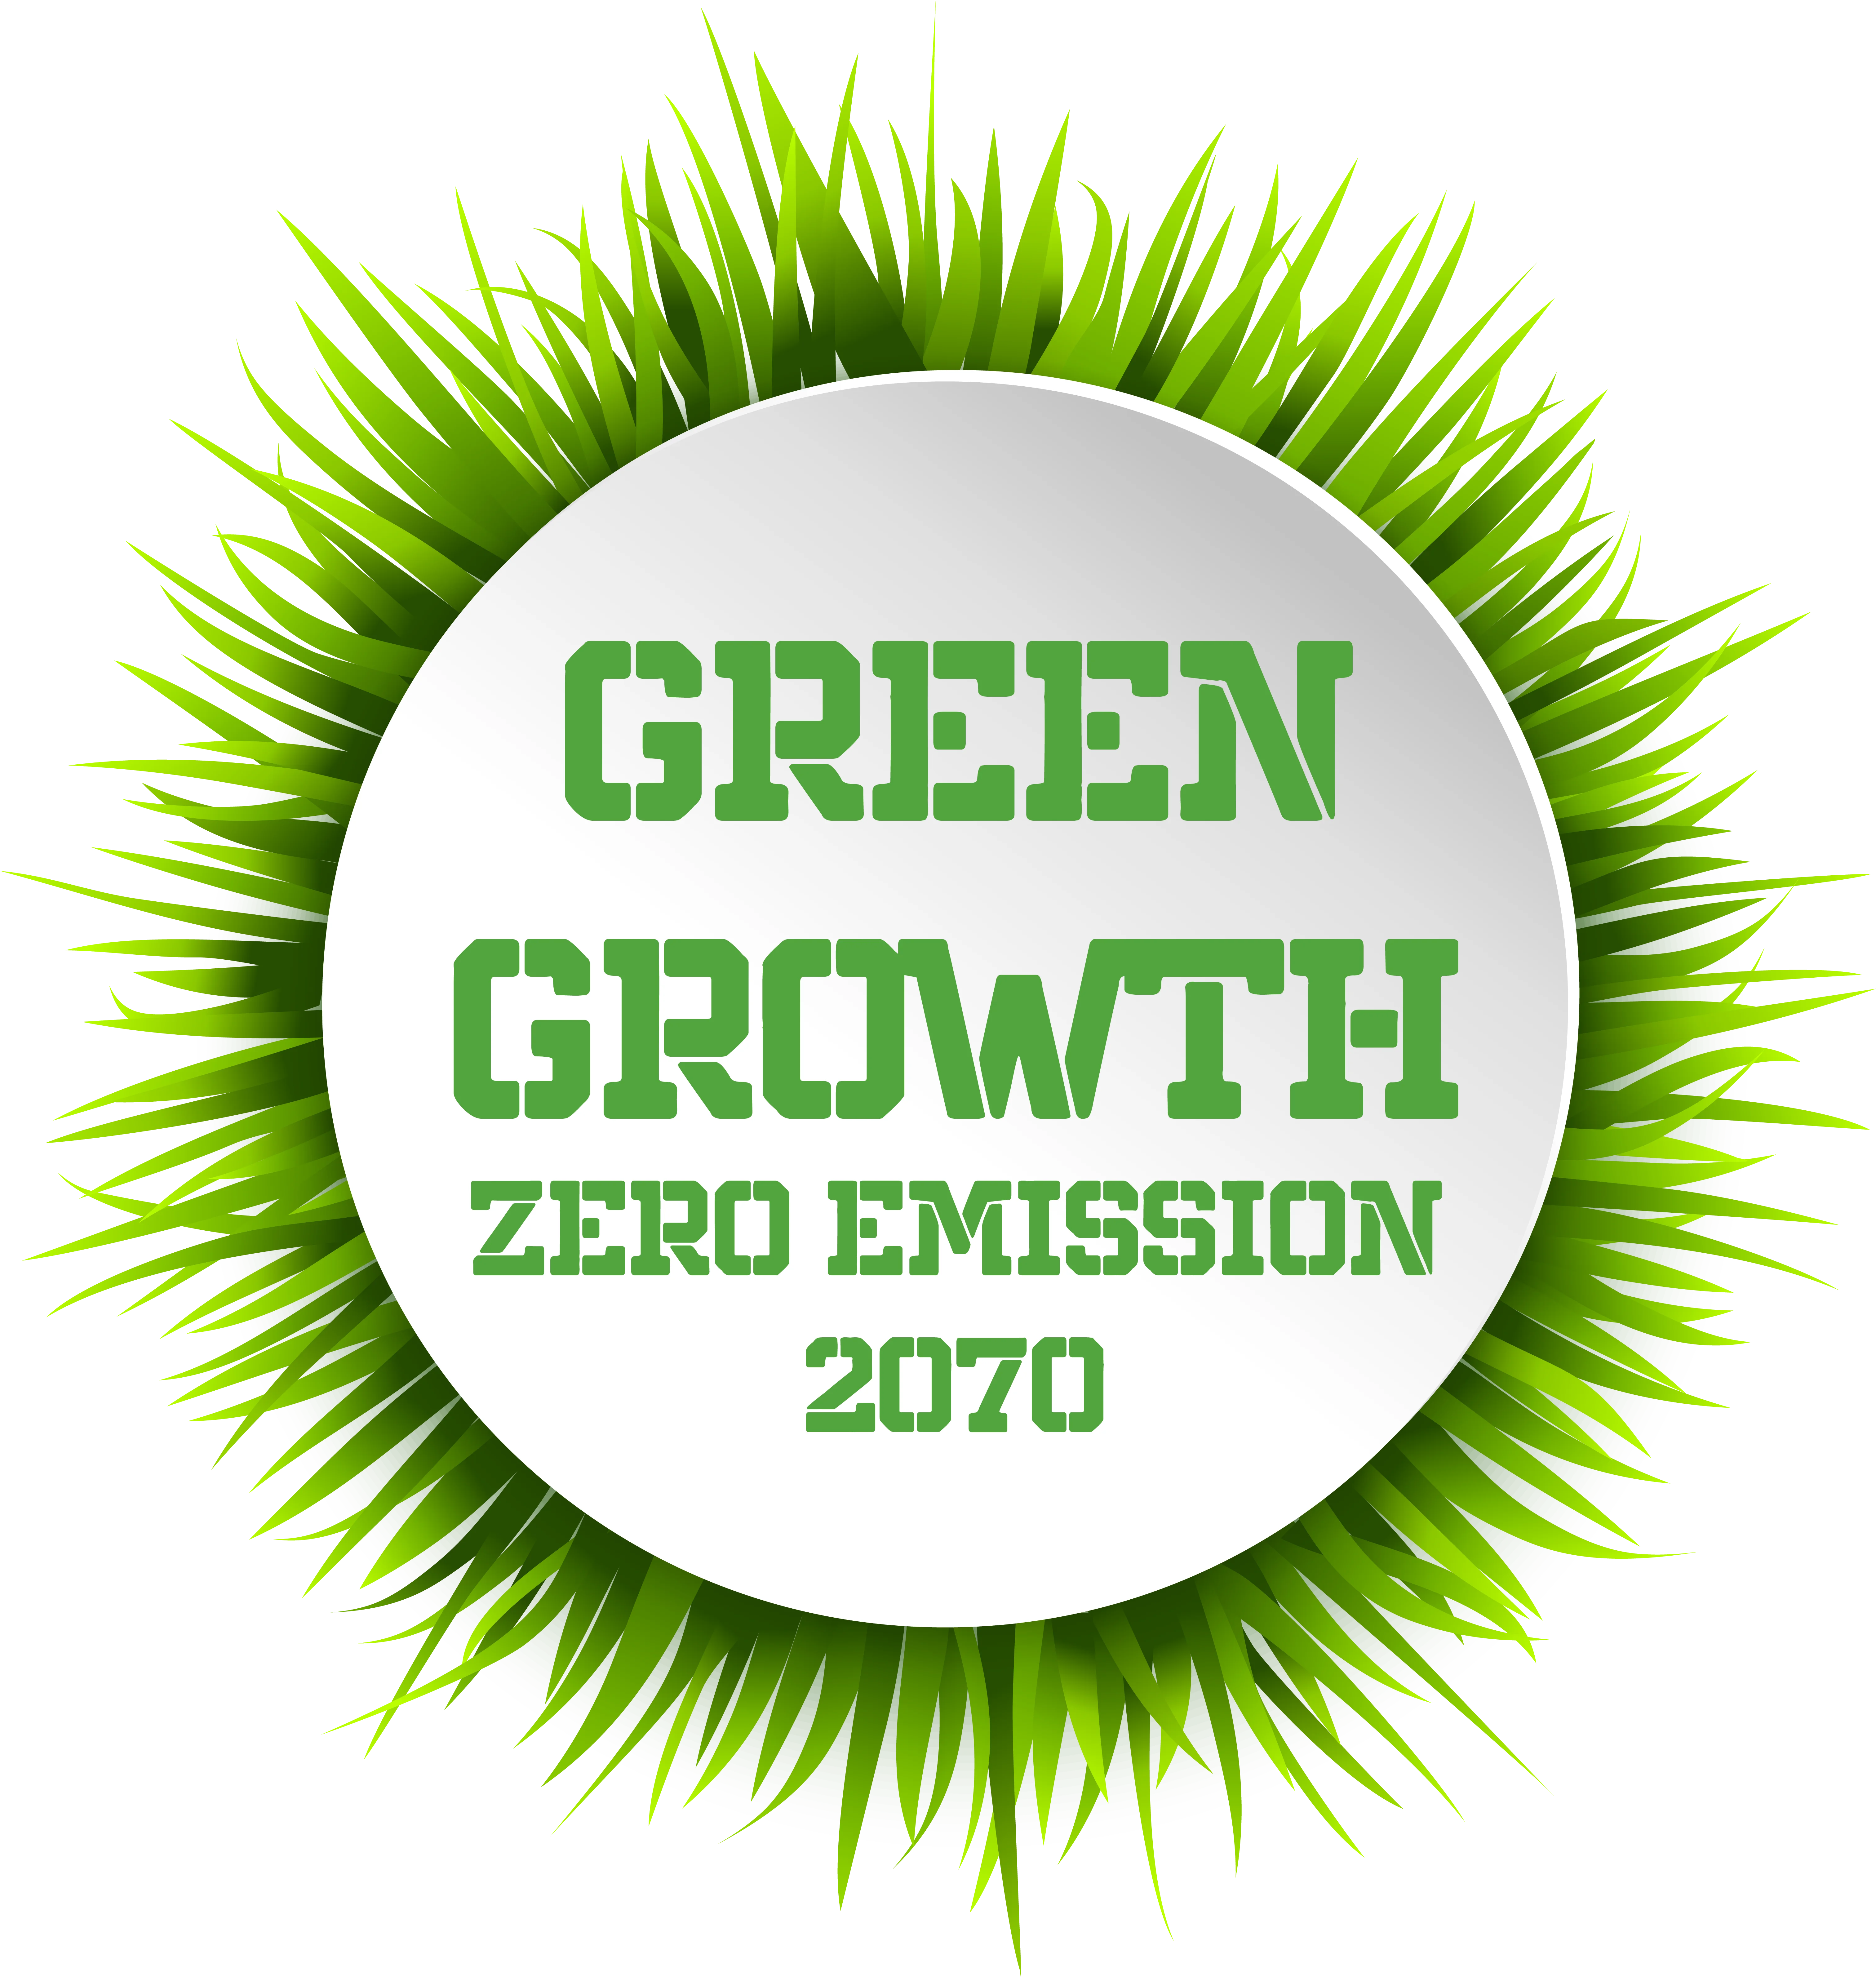 Promise - Green Growth 2070